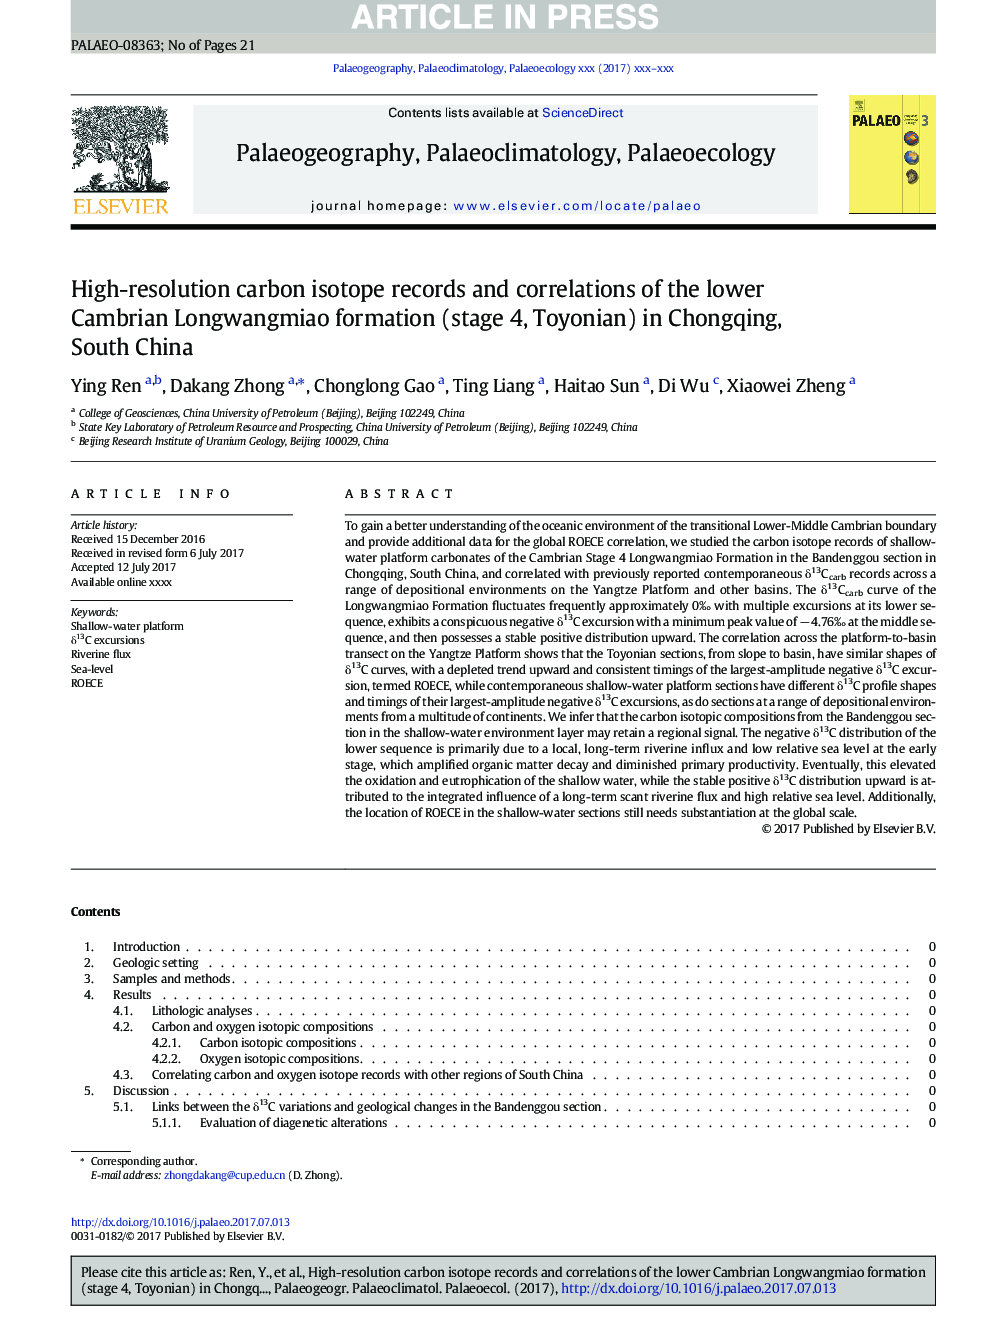 High-resolution carbon isotope records and correlations of the lower Cambrian Longwangmiao formation (stage 4, Toyonian) in Chongqing, South China